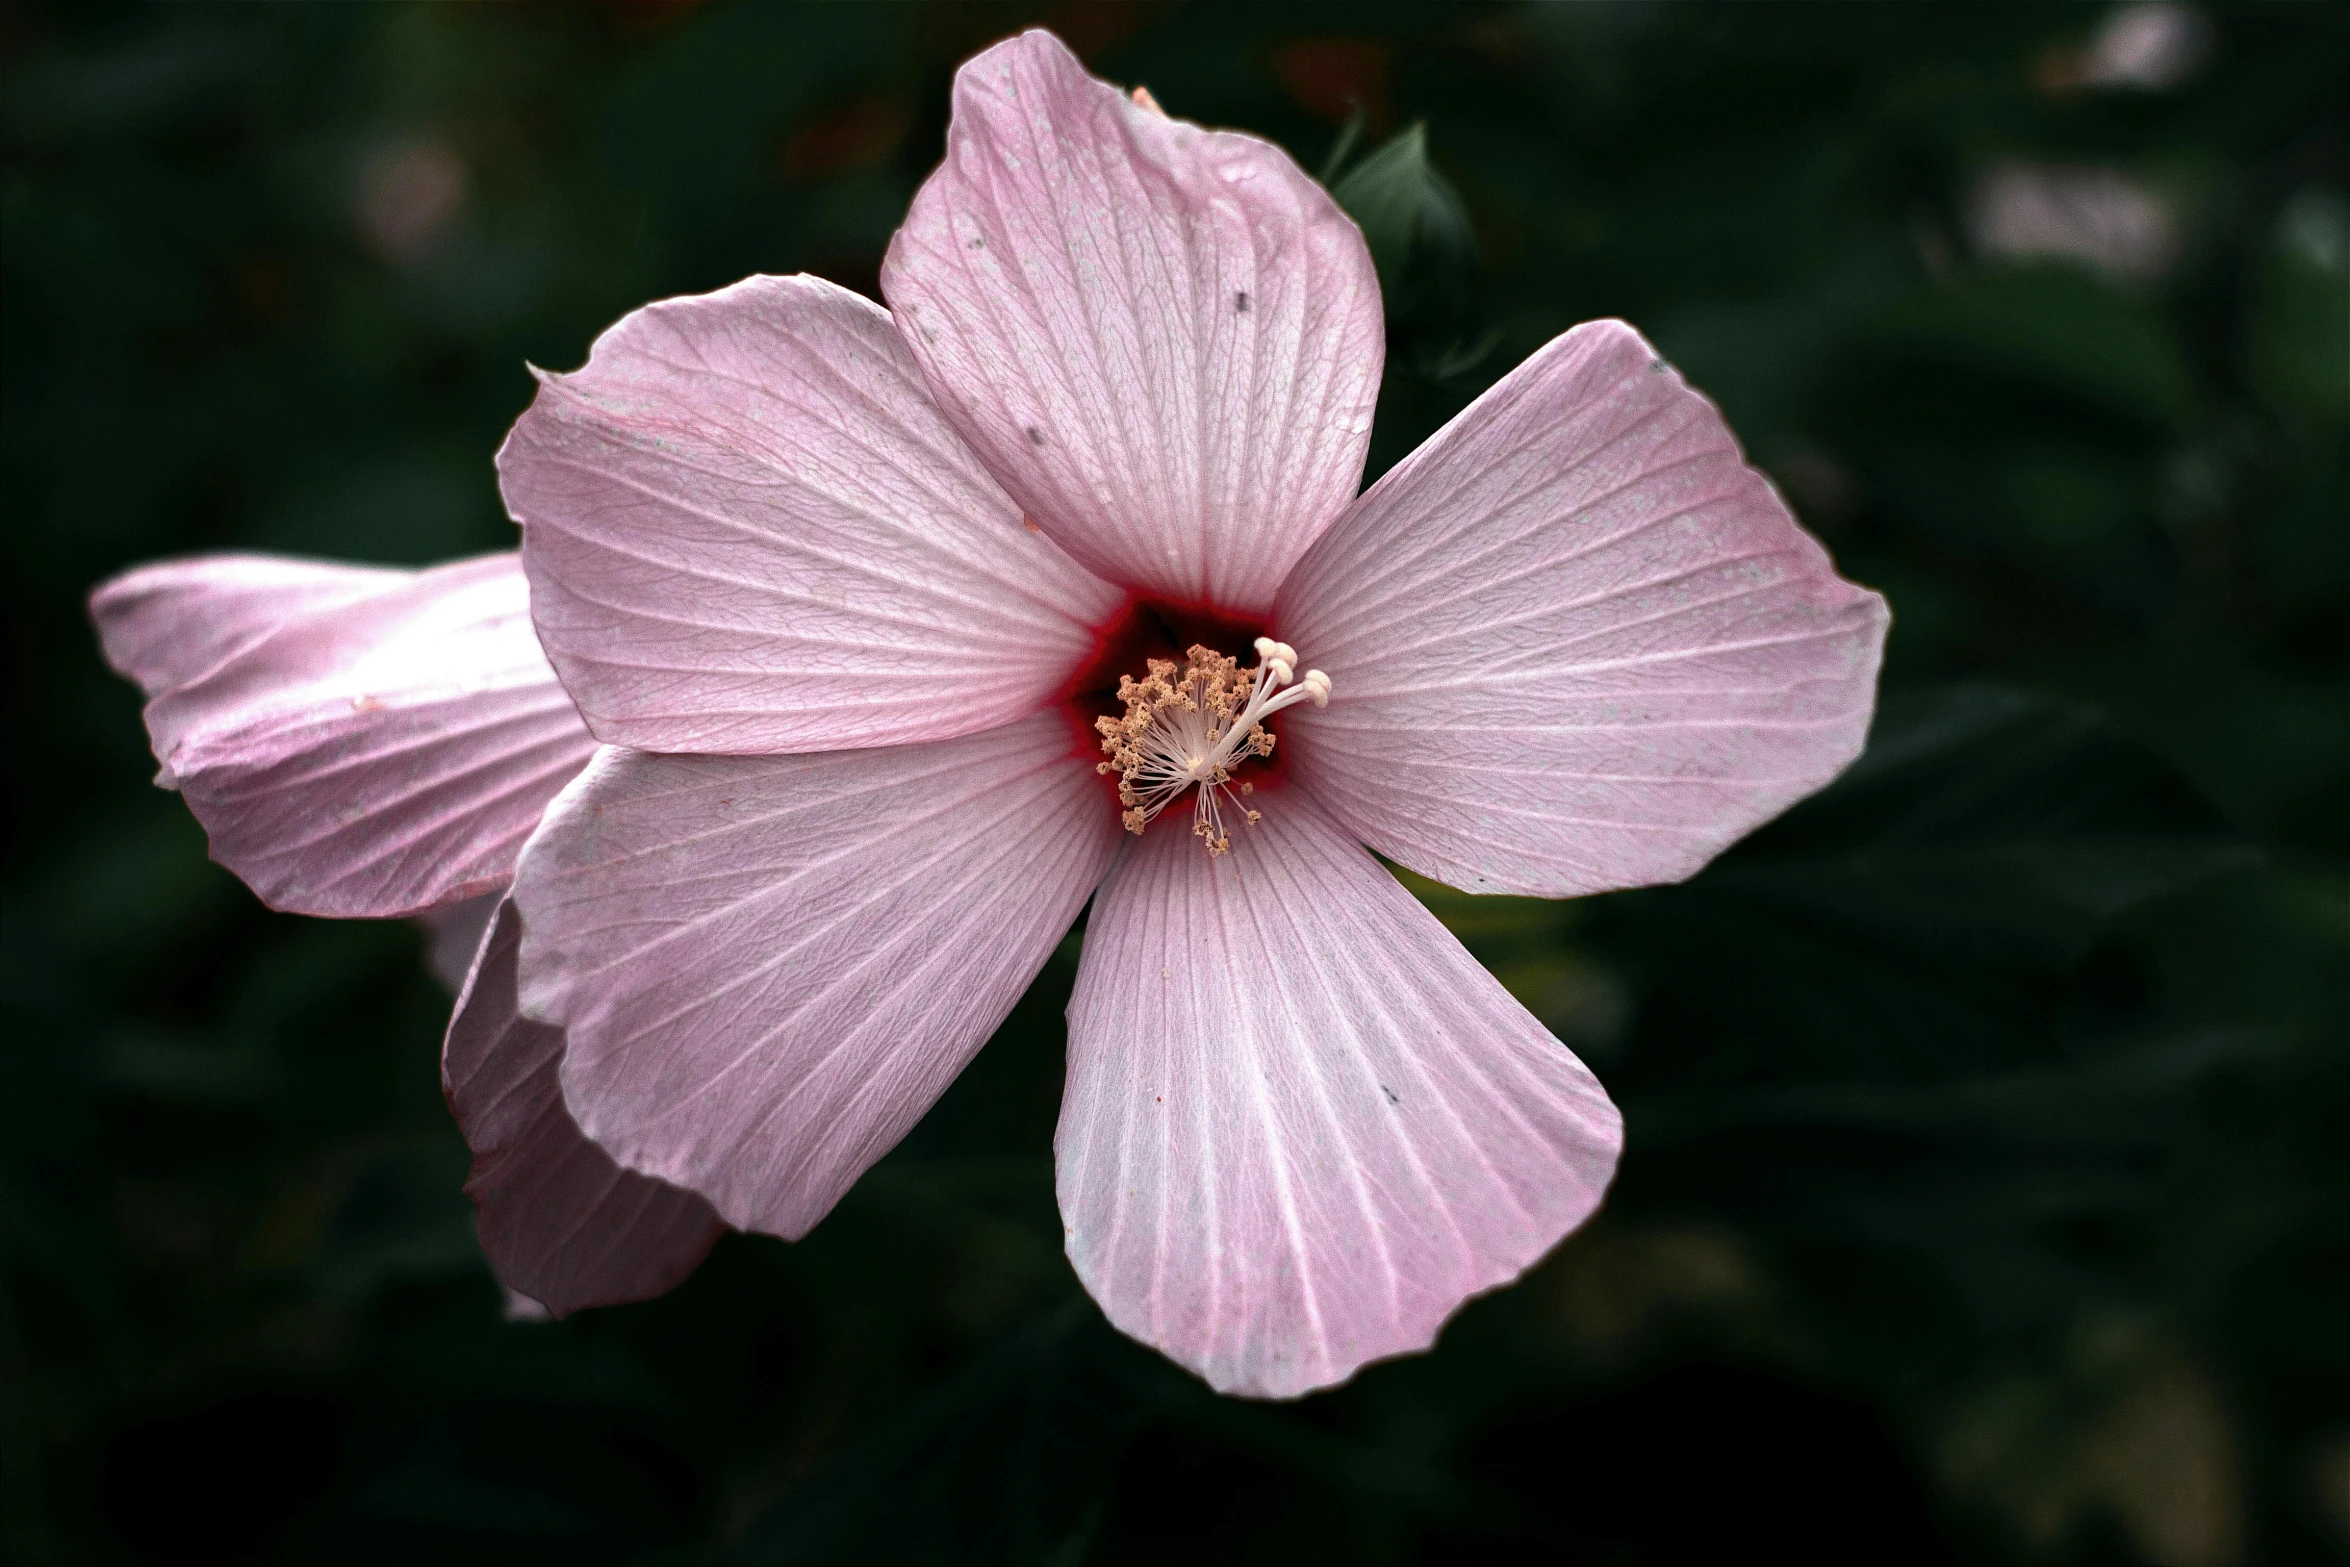 a single pink flower is seen in this image